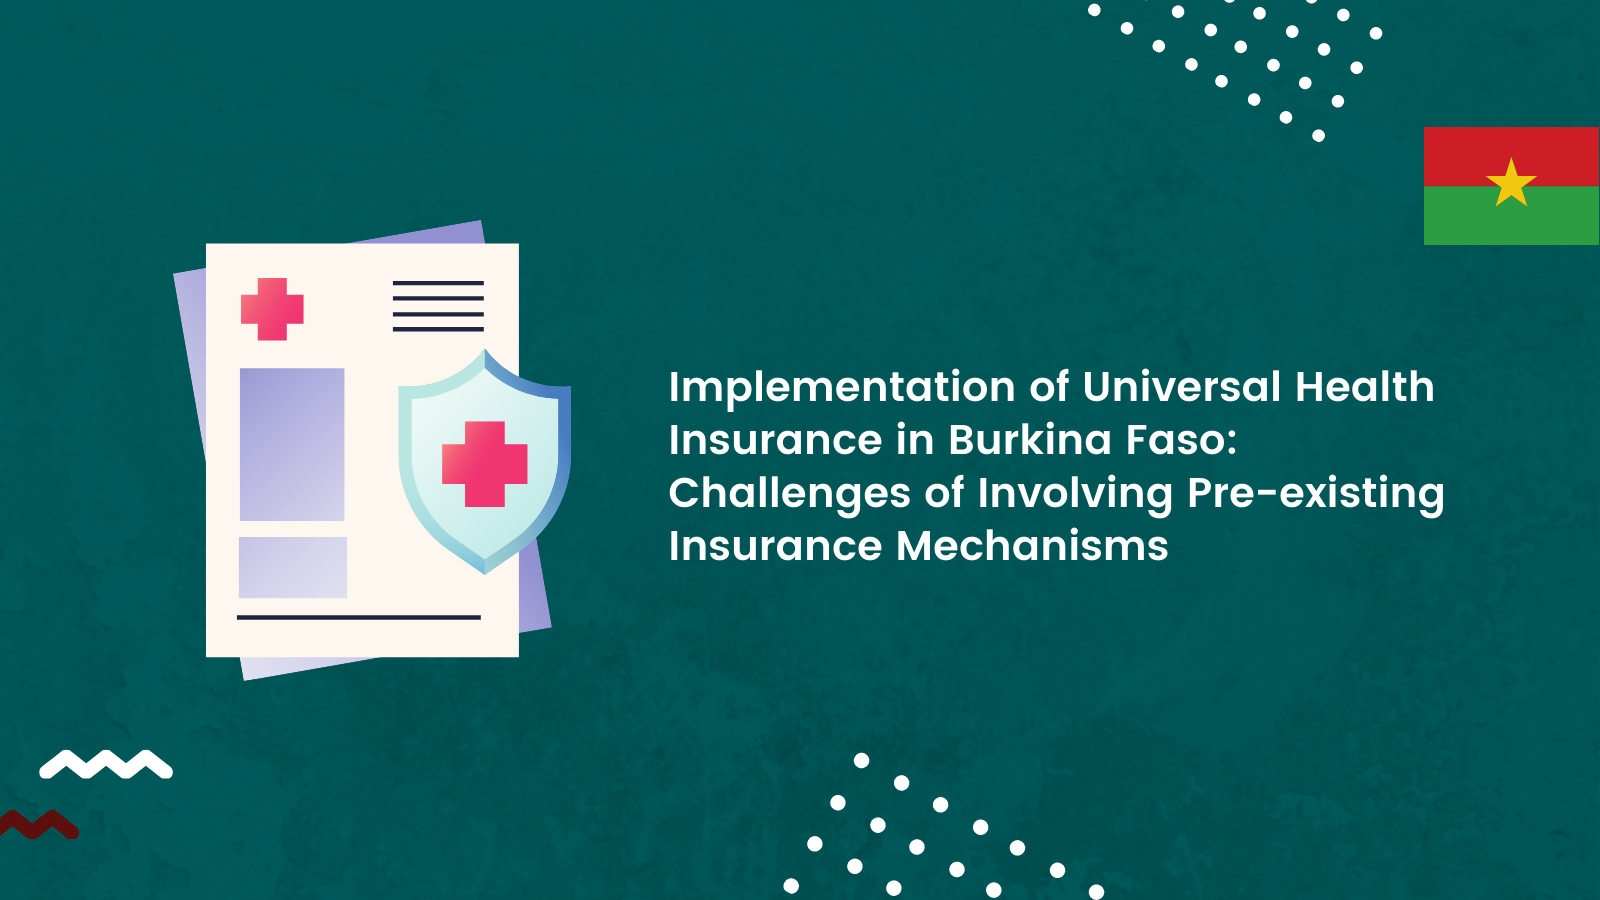 Implementation of Universal Health Insurance in Burkina Faso: Challenges of Involving Pre-existing Insurance Mechanisms